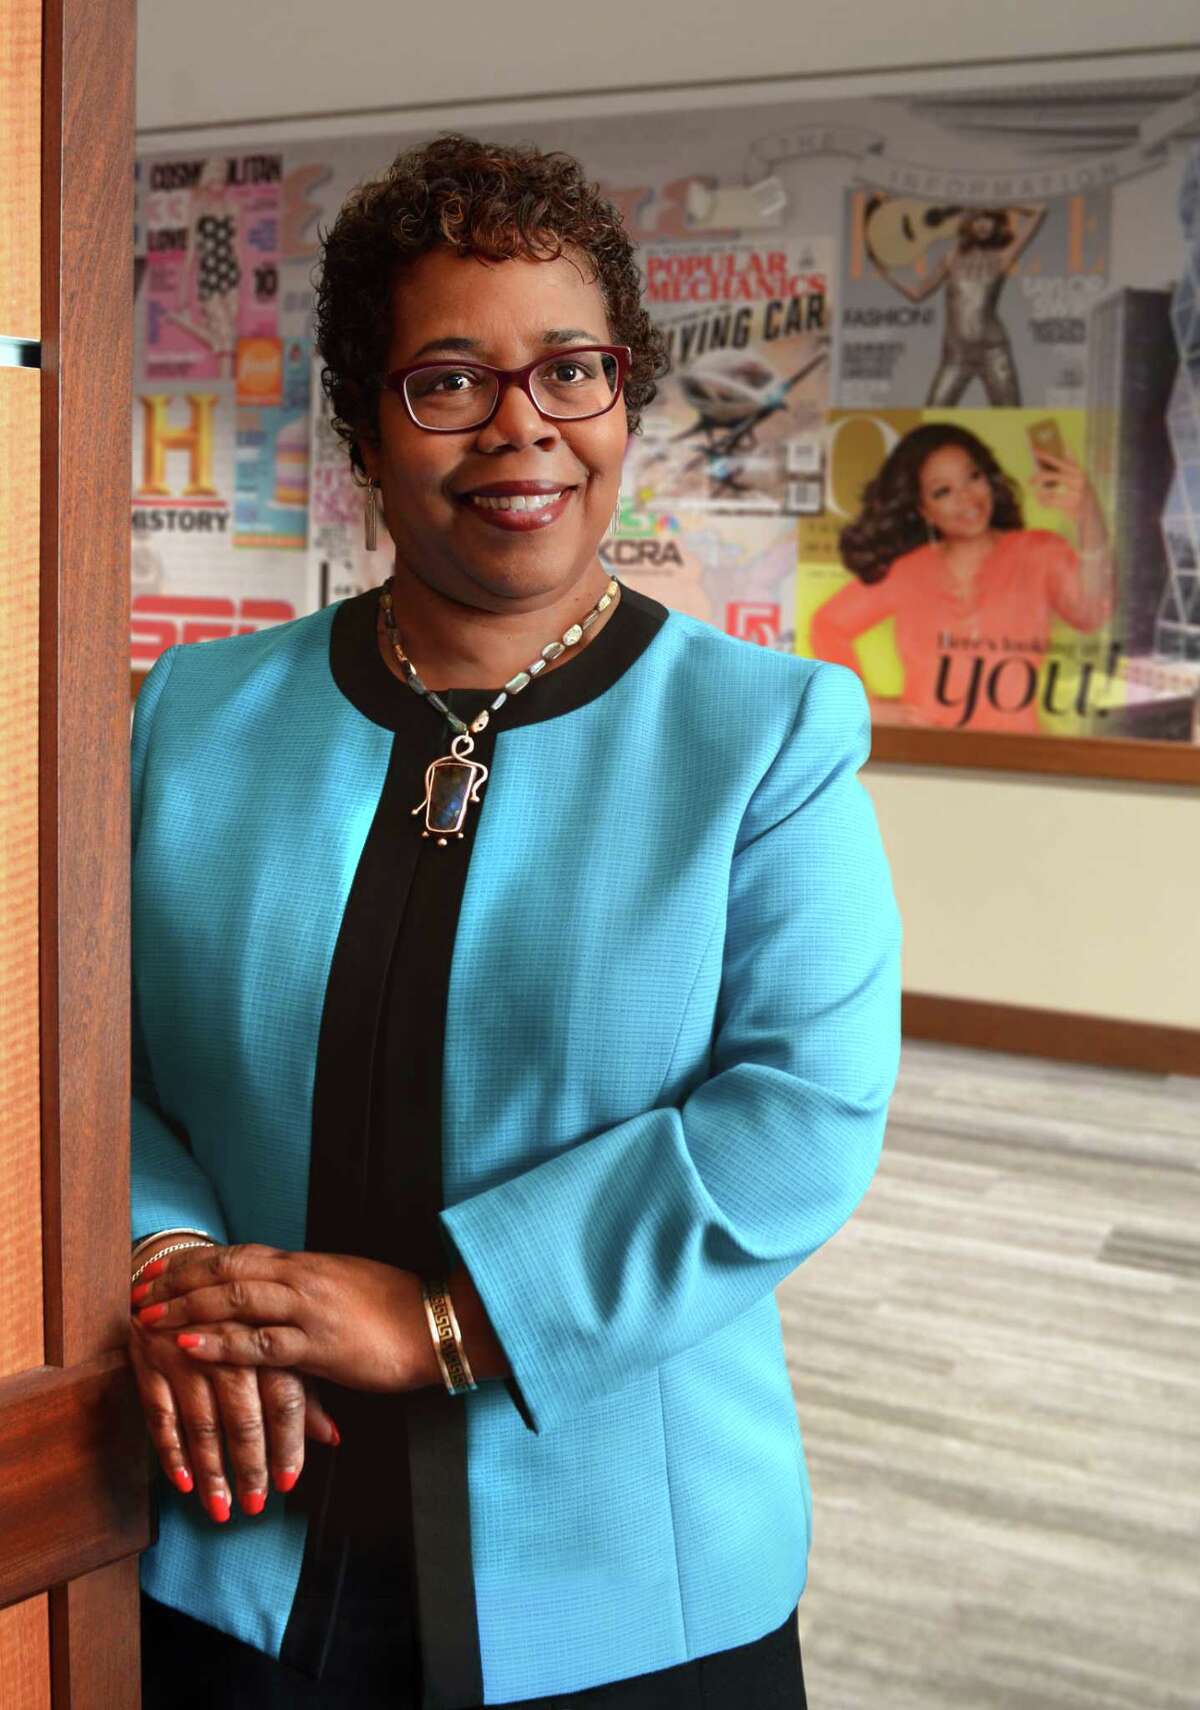 Gretchel Hathaway, Dean of Diversity and Inclusion, Chief Diversity Officer at Union College, will leave the school Aug. 3 for a new post at Franklin & Marshall in Lancaster, Pa. (Colleen Ingerto / Times Union)